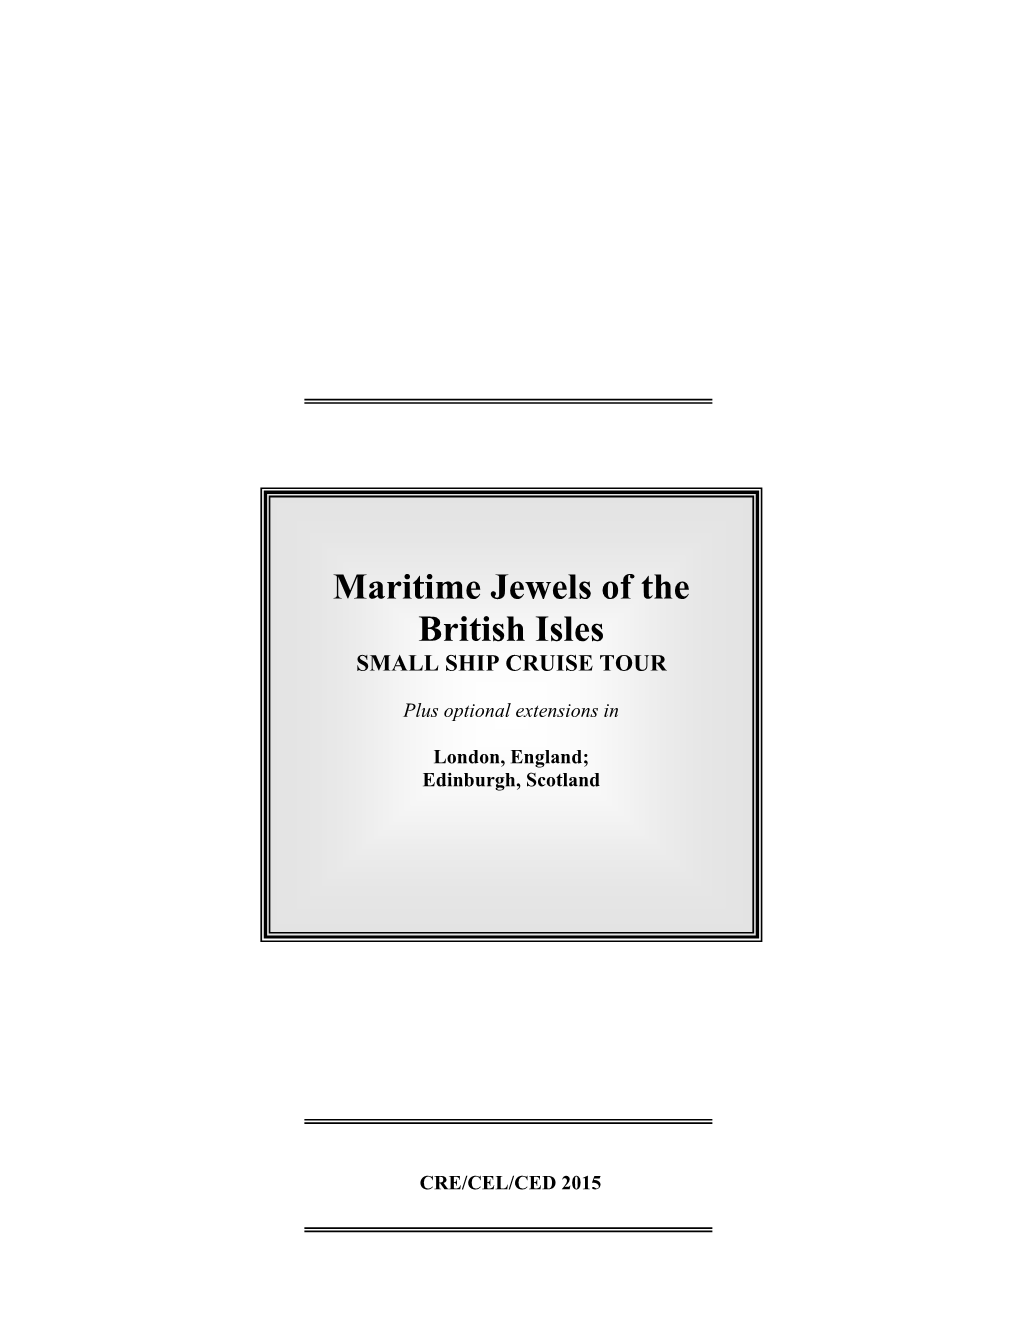 Maritime Jewels of the British Isles Table of Contents